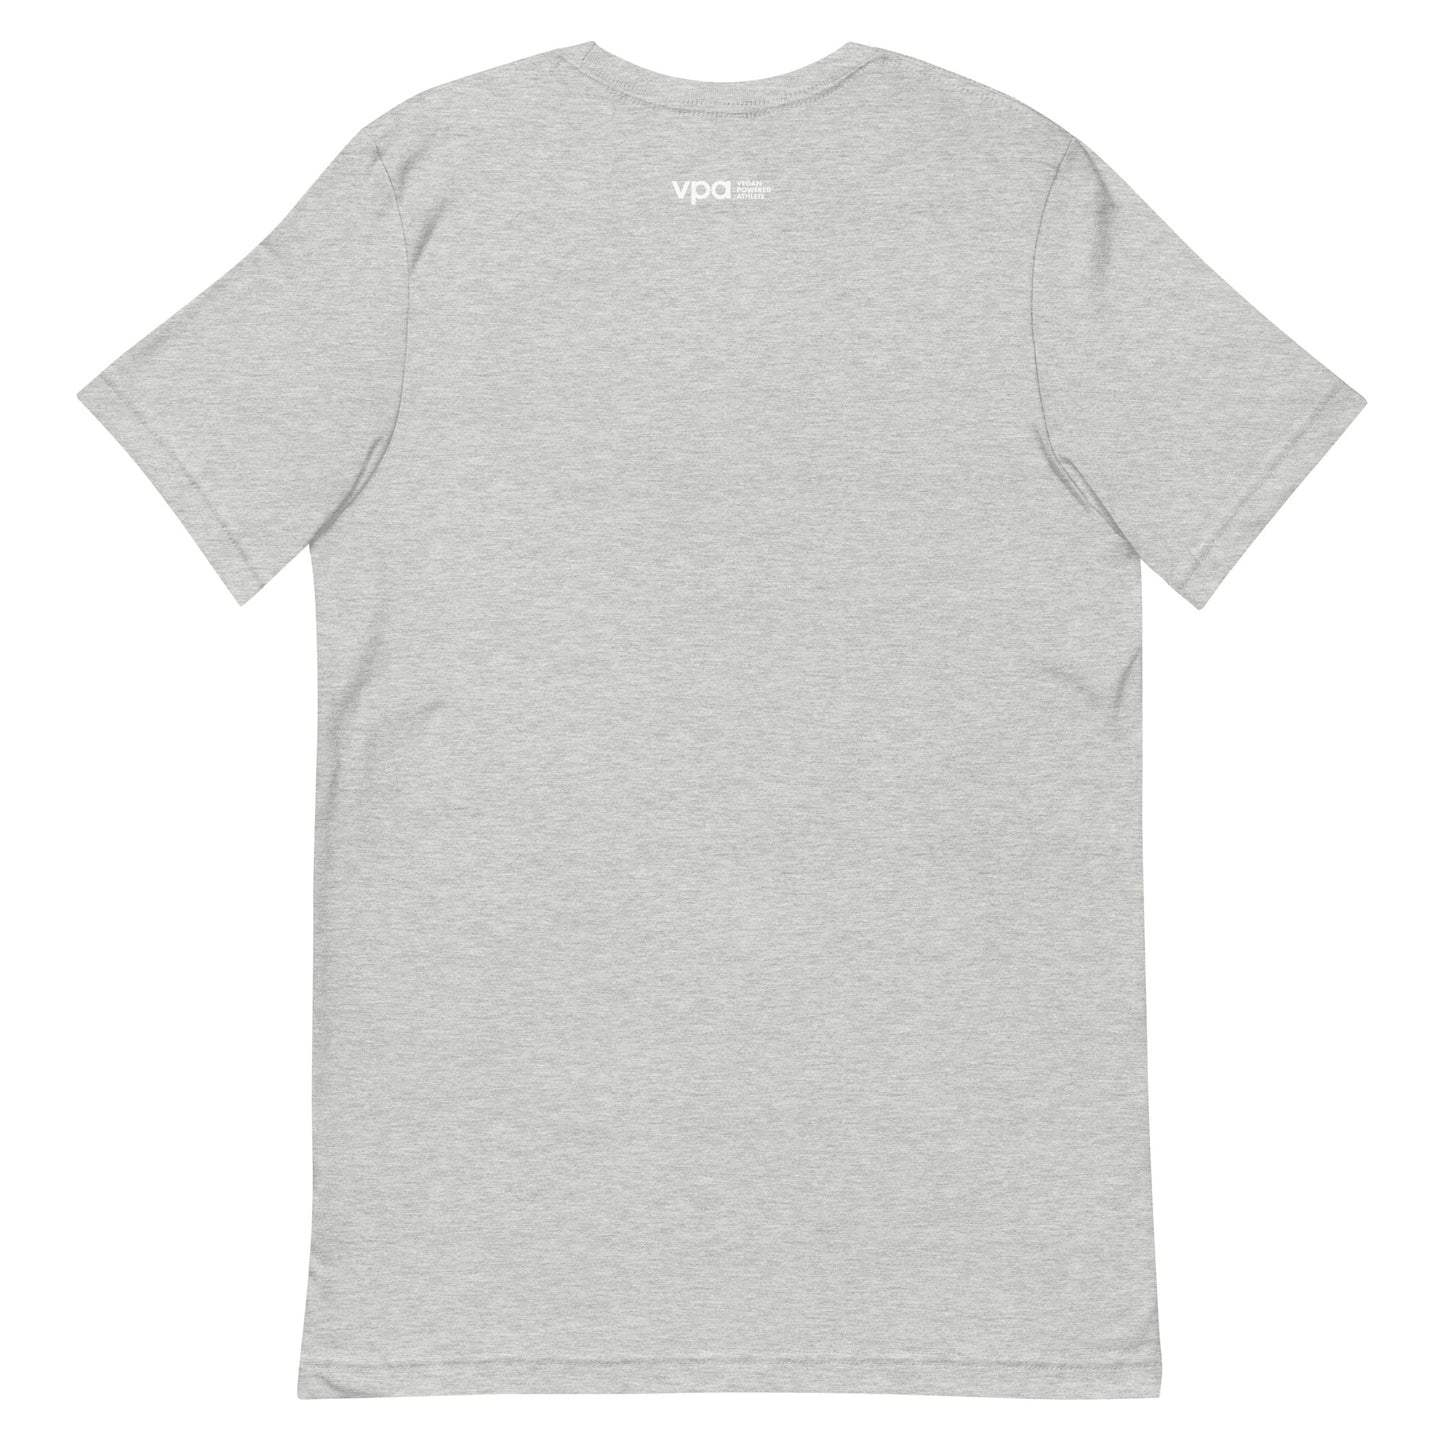 Load image into Gallery viewer, VEGAN Classic Unisex t-shirt
